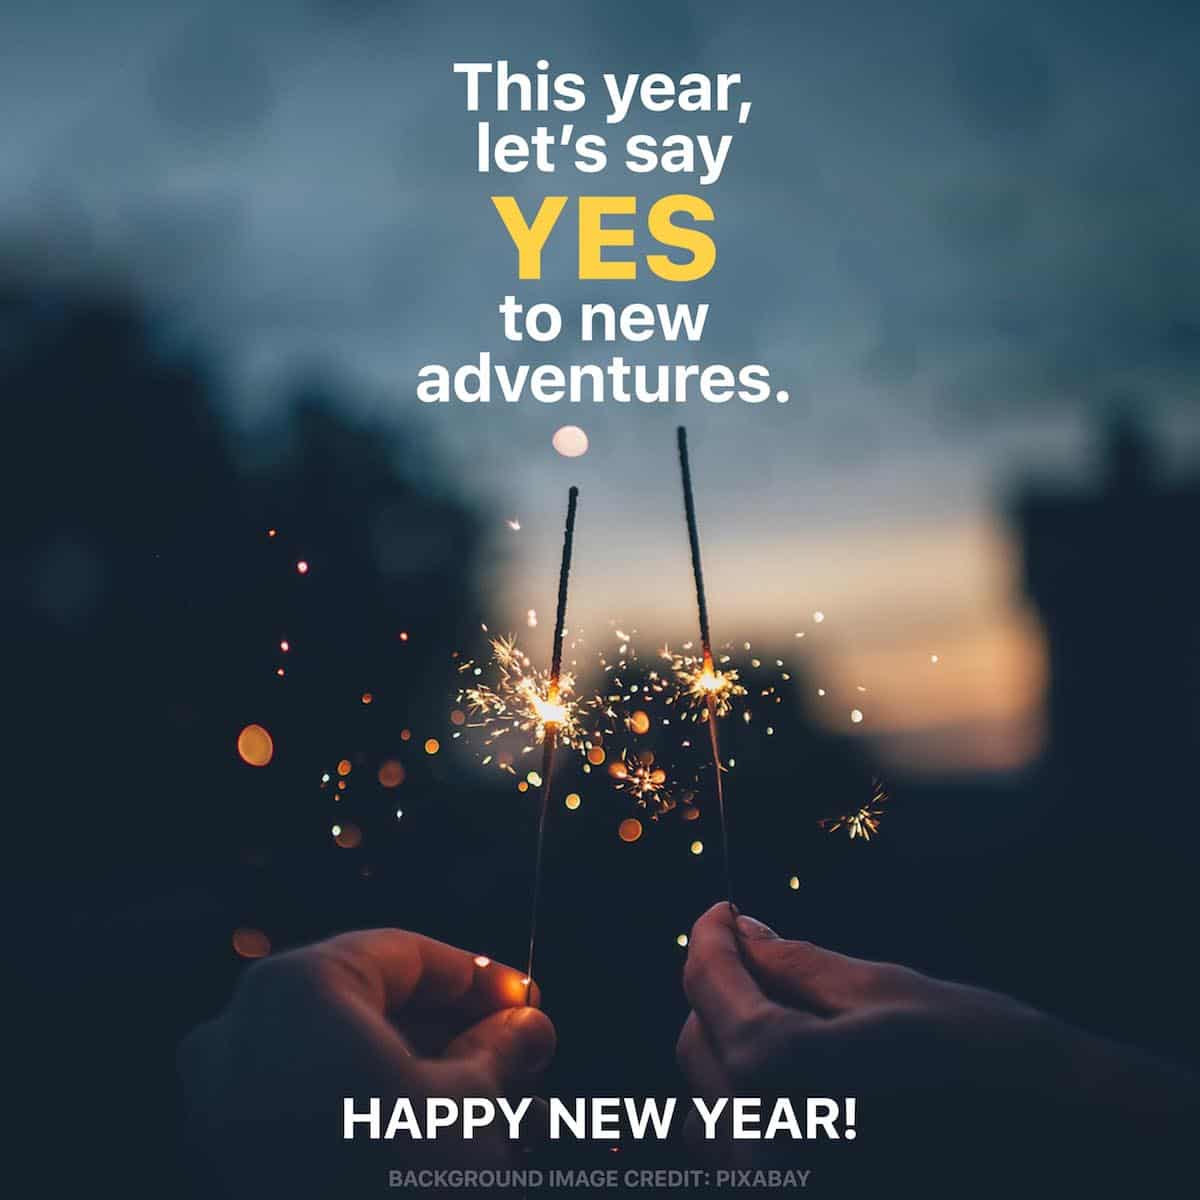 12 NEW YEAR QUOTES, WISHES &amp; GREETINGS for Travelers | The Poor Traveler  Itinerary Blog